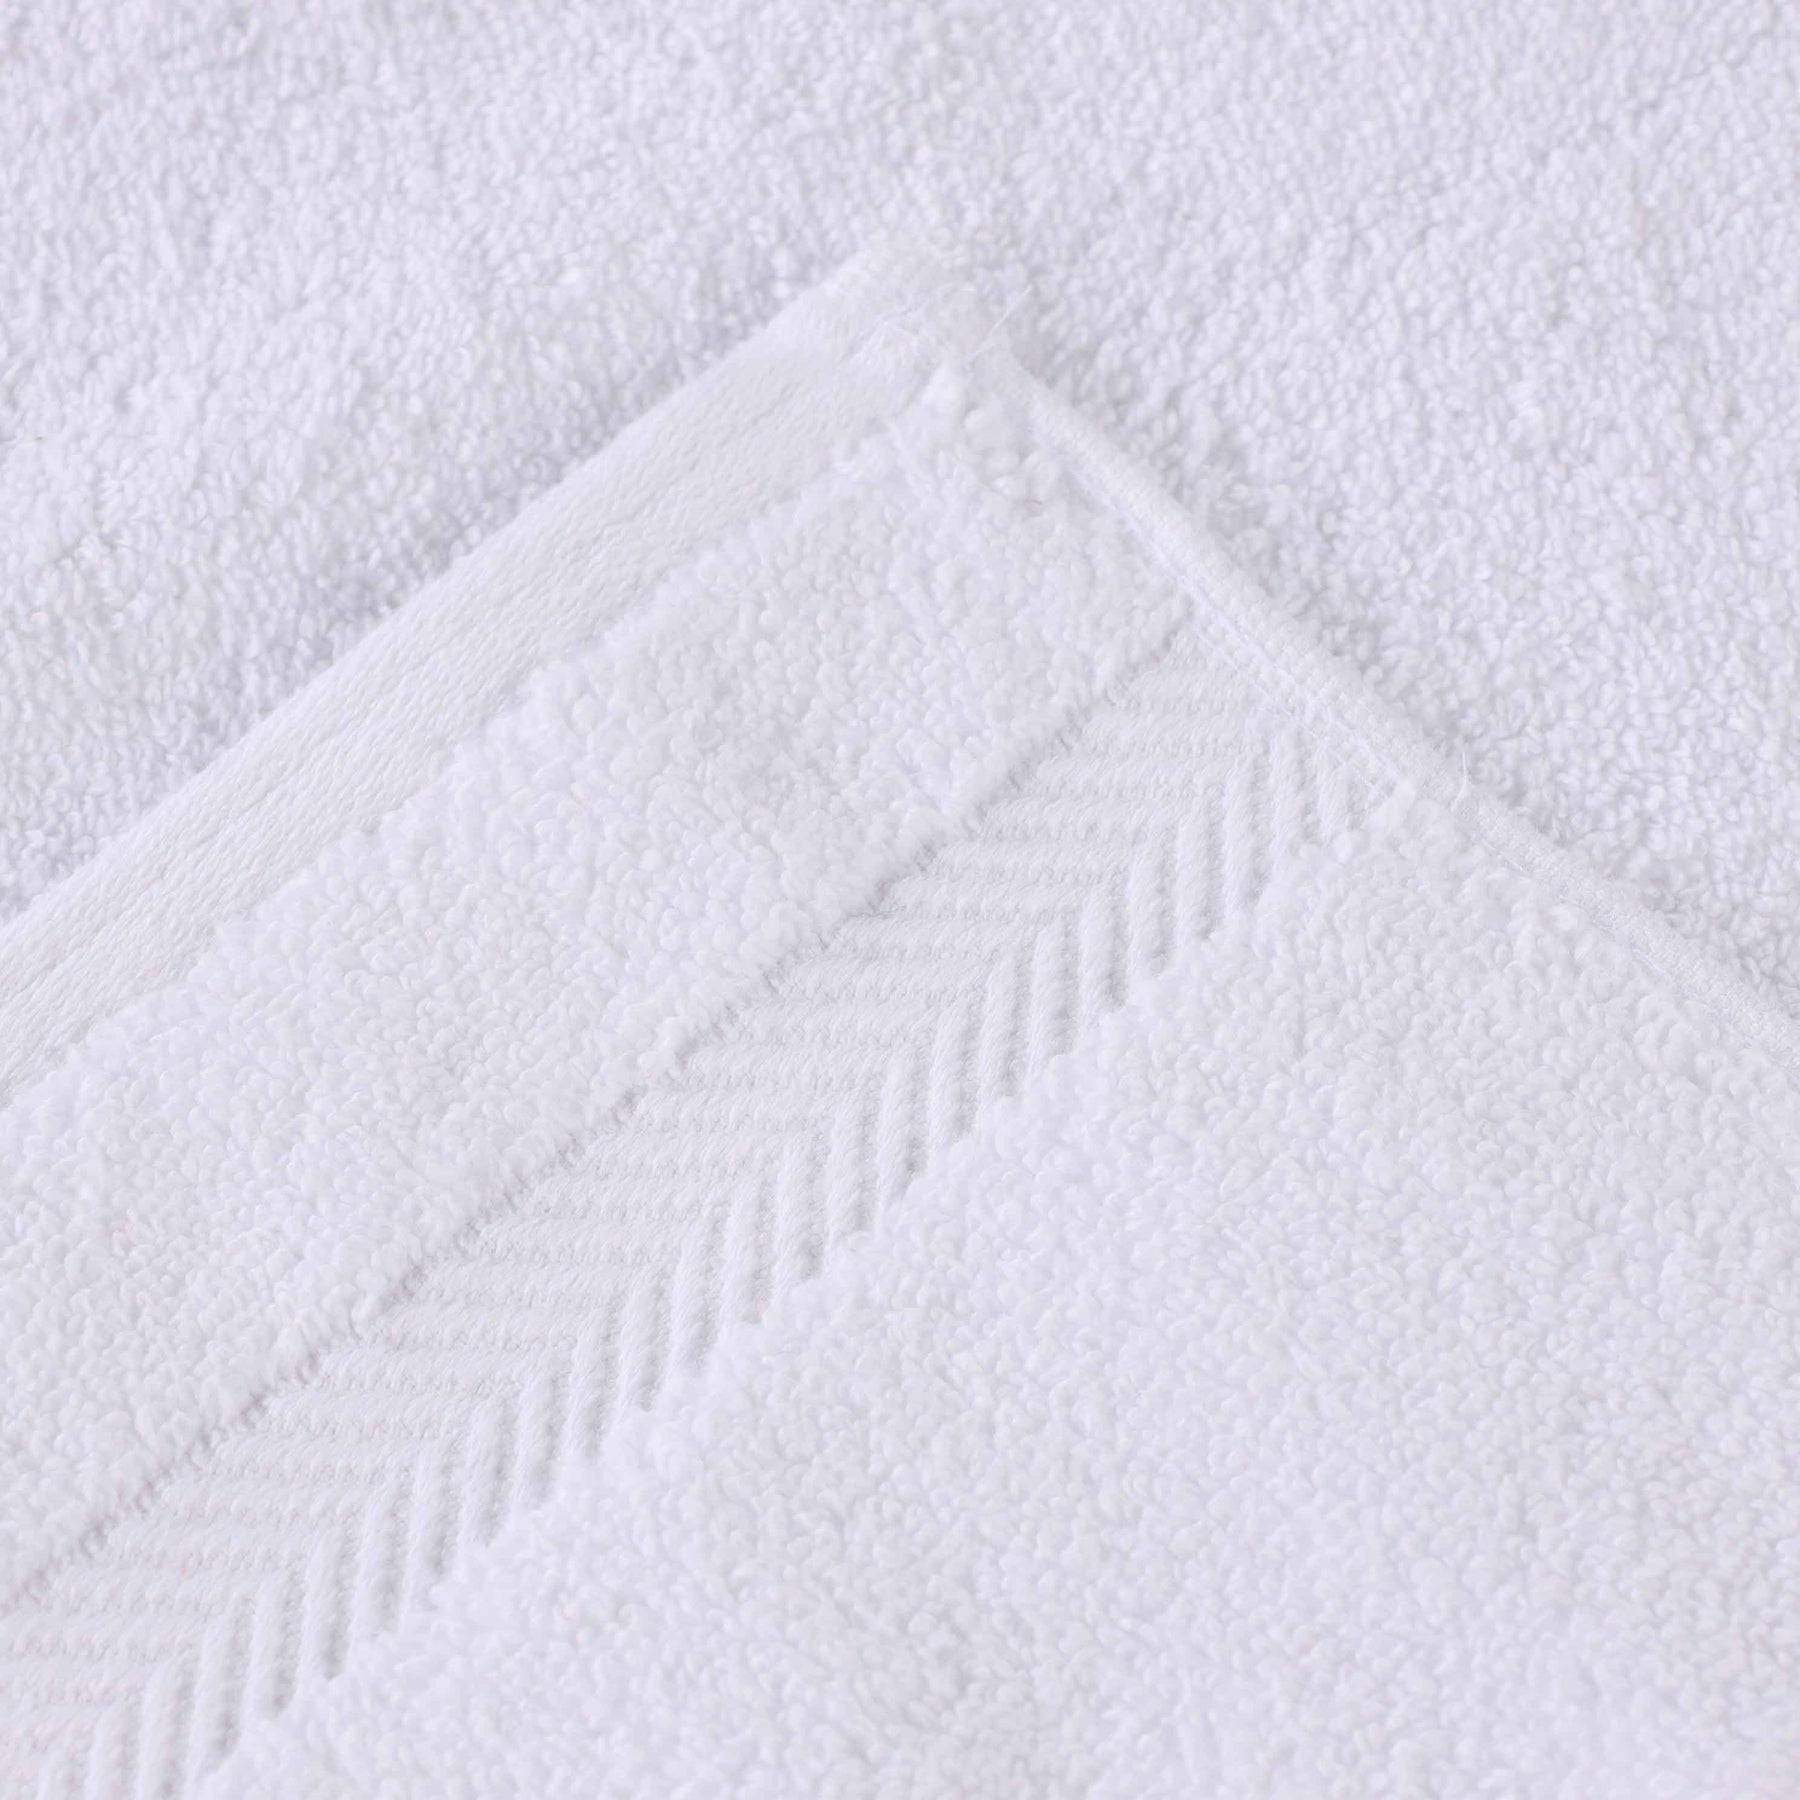 Zero-Twist Cotton Quick-Drying Absorbent Assorted 6 Piece Towel Set - White